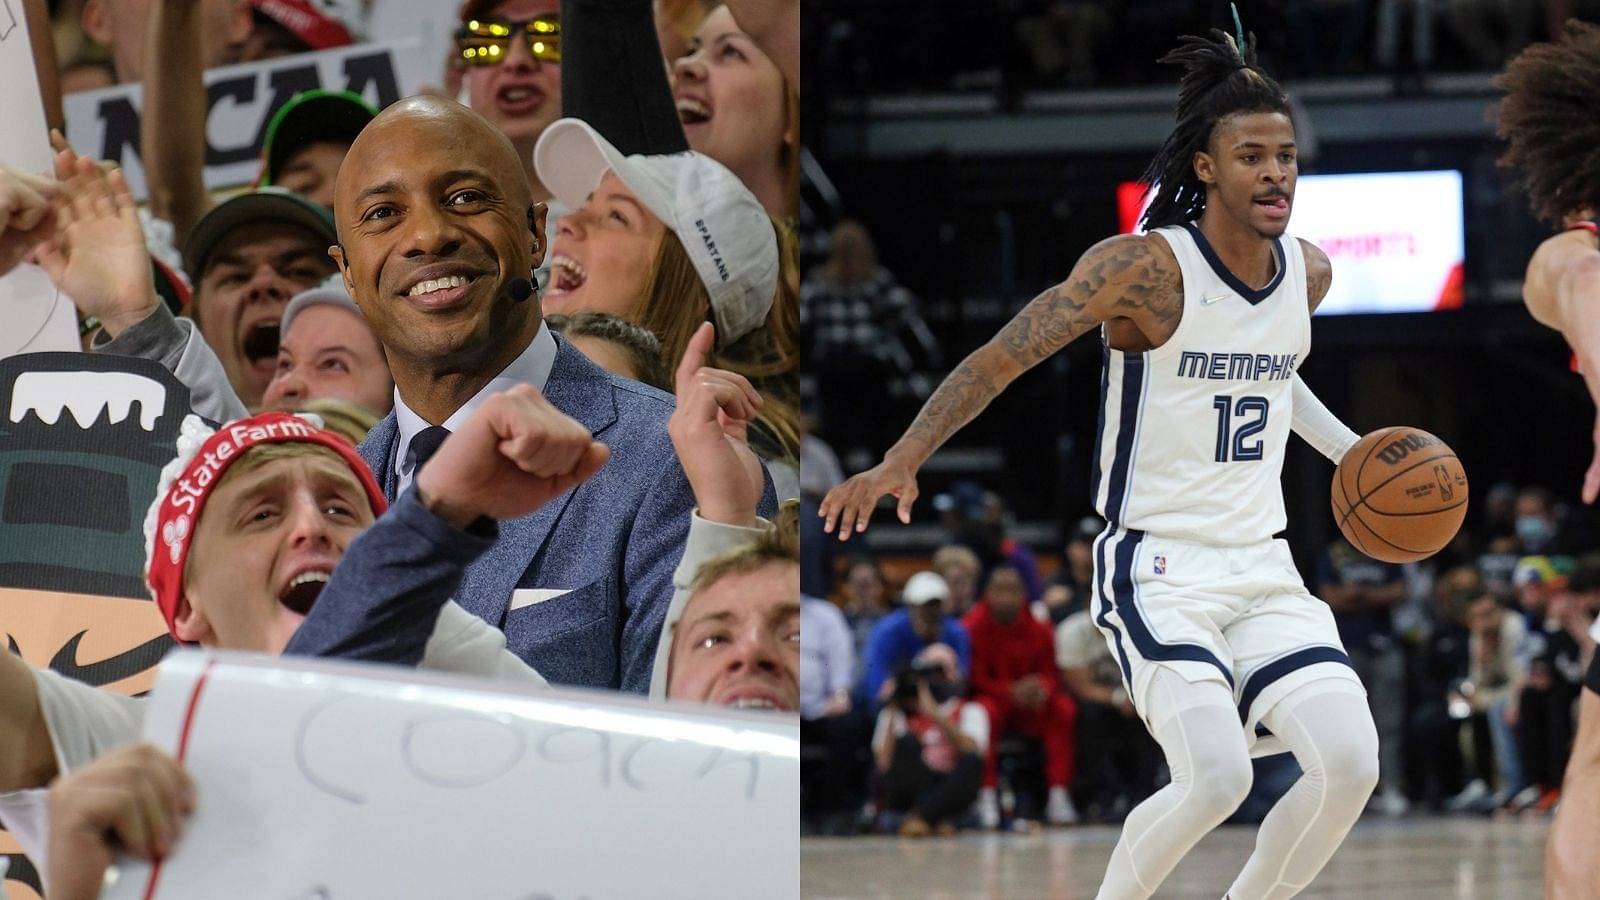 "The Memphis Grizzlies are going to the NBA Finals!": Jay Williams comes up with a bold prediction on ESPN, backs the team led by Ja Morant to go past the Warriors and the Suns